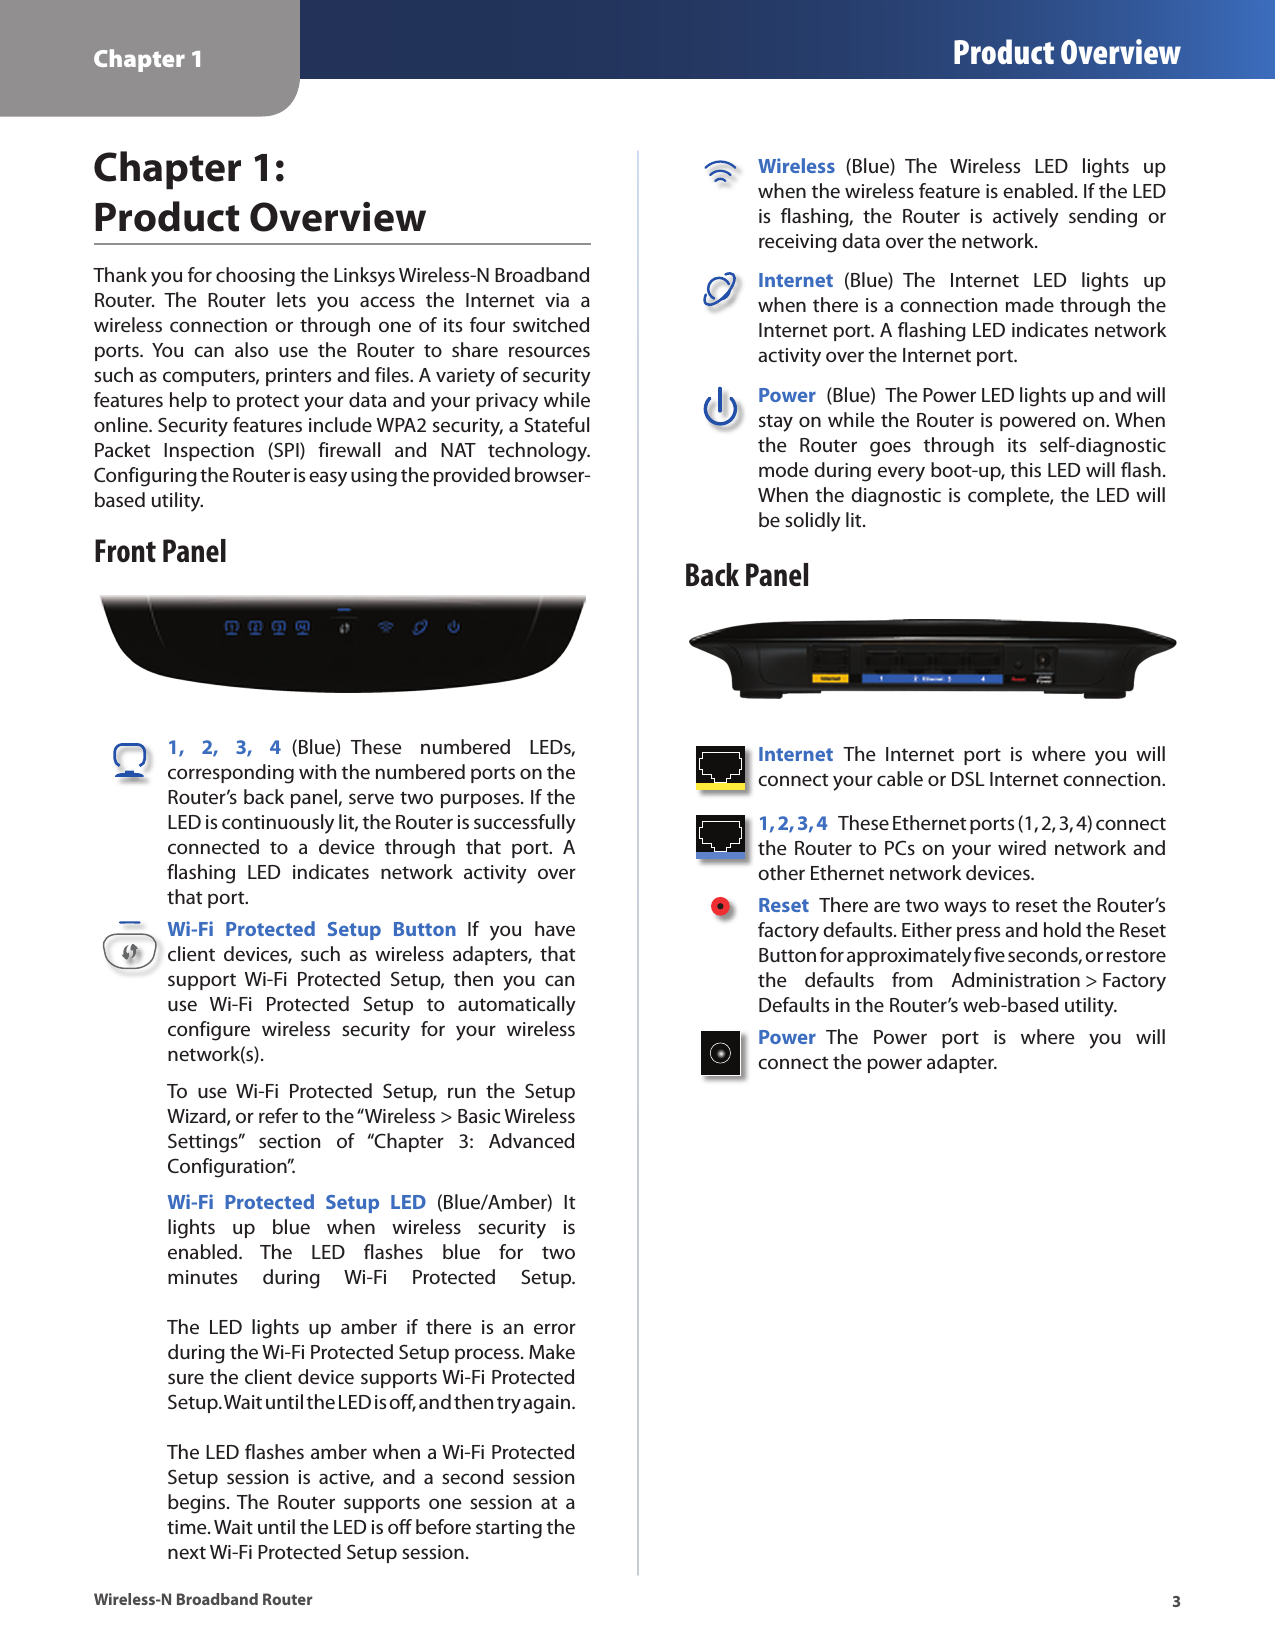 Chapter 1 Product Overview3Wireless-N Broadband RouterChapter 1:  Product OverviewThank you for choosing the Linksys Wireless-N Broadband Router.  The  Router  lets  you  access  the  Internet  via  a  wireless connection or through one of  its  four switched ports.  You  can  also  use  the  Router  to  share  resources such as computers, printers and files. A variety of security features help to protect your data and your privacy while online. Security features include WPA2 security, a Stateful Packet  Inspection  (SPI)  firewall  and  NAT  technology. Configuring the Router is easy using the provided browser-based utility.Front Panel1,  2,  3,  4  (Blue)  These  numbered  LEDs, corresponding with the numbered ports on the Router’s back panel, serve two purposes. If the LED is continuously lit, the Router is successfully connected  to  a  device  through  that  port.  A flashing  LED  indicates  network  activity  over that port.Wi-Fi  Protected  Setup  Button  If  you  have client  devices,  such  as  wireless  adapters,  that support  Wi-Fi  Protected  Setup,  then  you  can use  Wi-Fi  Protected  Setup  to  automatically configure  wireless  security  for  your  wireless network(s).To  use  Wi-Fi  Protected  Setup,  run  the  Setup Wizard, or refer to the “Wireless &gt; Basic Wireless Settings”  section  of  “Chapter  3:  Advanced Configuration”.Wi-Fi  Protected  Setup  LED  (Blue/Amber)  It lights  up  blue  when  wireless  security  is enabled.  The  LED  flashes  blue  for  two minutes  during  Wi-Fi  Protected  Setup.    The  LED  lights  up  amber  if  there  is  an  error during the Wi-Fi Protected Setup process. Make sure the client device supports Wi-Fi Protected Setup. Wait until the LED is off, and then try again.   The LED flashes amber when a Wi-Fi Protected Setup  session  is  active,  and  a  second  session begins. The  Router  supports  one  session  at  a time. Wait until the LED is off before starting the next Wi-Fi Protected Setup session.Wireless  (Blue)  The  Wireless  LED  lights  up when the wireless feature is enabled. If the LED is  flashing,  the  Router  is  actively  sending  or receiving data over the network.Internet  (Blue)  The  Internet  LED  lights  up when there is a connection made through the Internet port. A flashing LED indicates network activity over the Internet port.Power  (Blue)  The Power LED lights up and will stay on while the Router is powered on. When the  Router  goes  through  its  self-diagnostic mode during every boot-up, this LED will flash. When the diagnostic is complete, the LED will be solidly lit.Back PanelInternet  The  Internet  port  is  where  you  will connect your cable or DSL Internet connection. 1, 2, 3, 4  These Ethernet ports (1, 2, 3, 4) connect the Router to PCs on your wired network and other Ethernet network devices. Reset  There are two ways to reset the Router’s factory defaults. Either press and hold the Reset Button for approximately five seconds, or restore the  defaults  from  Administration &gt; Factory Defaults in the Router’s web-based utility. Power  The  Power  port  is  where  you  will  connect the power adapter.